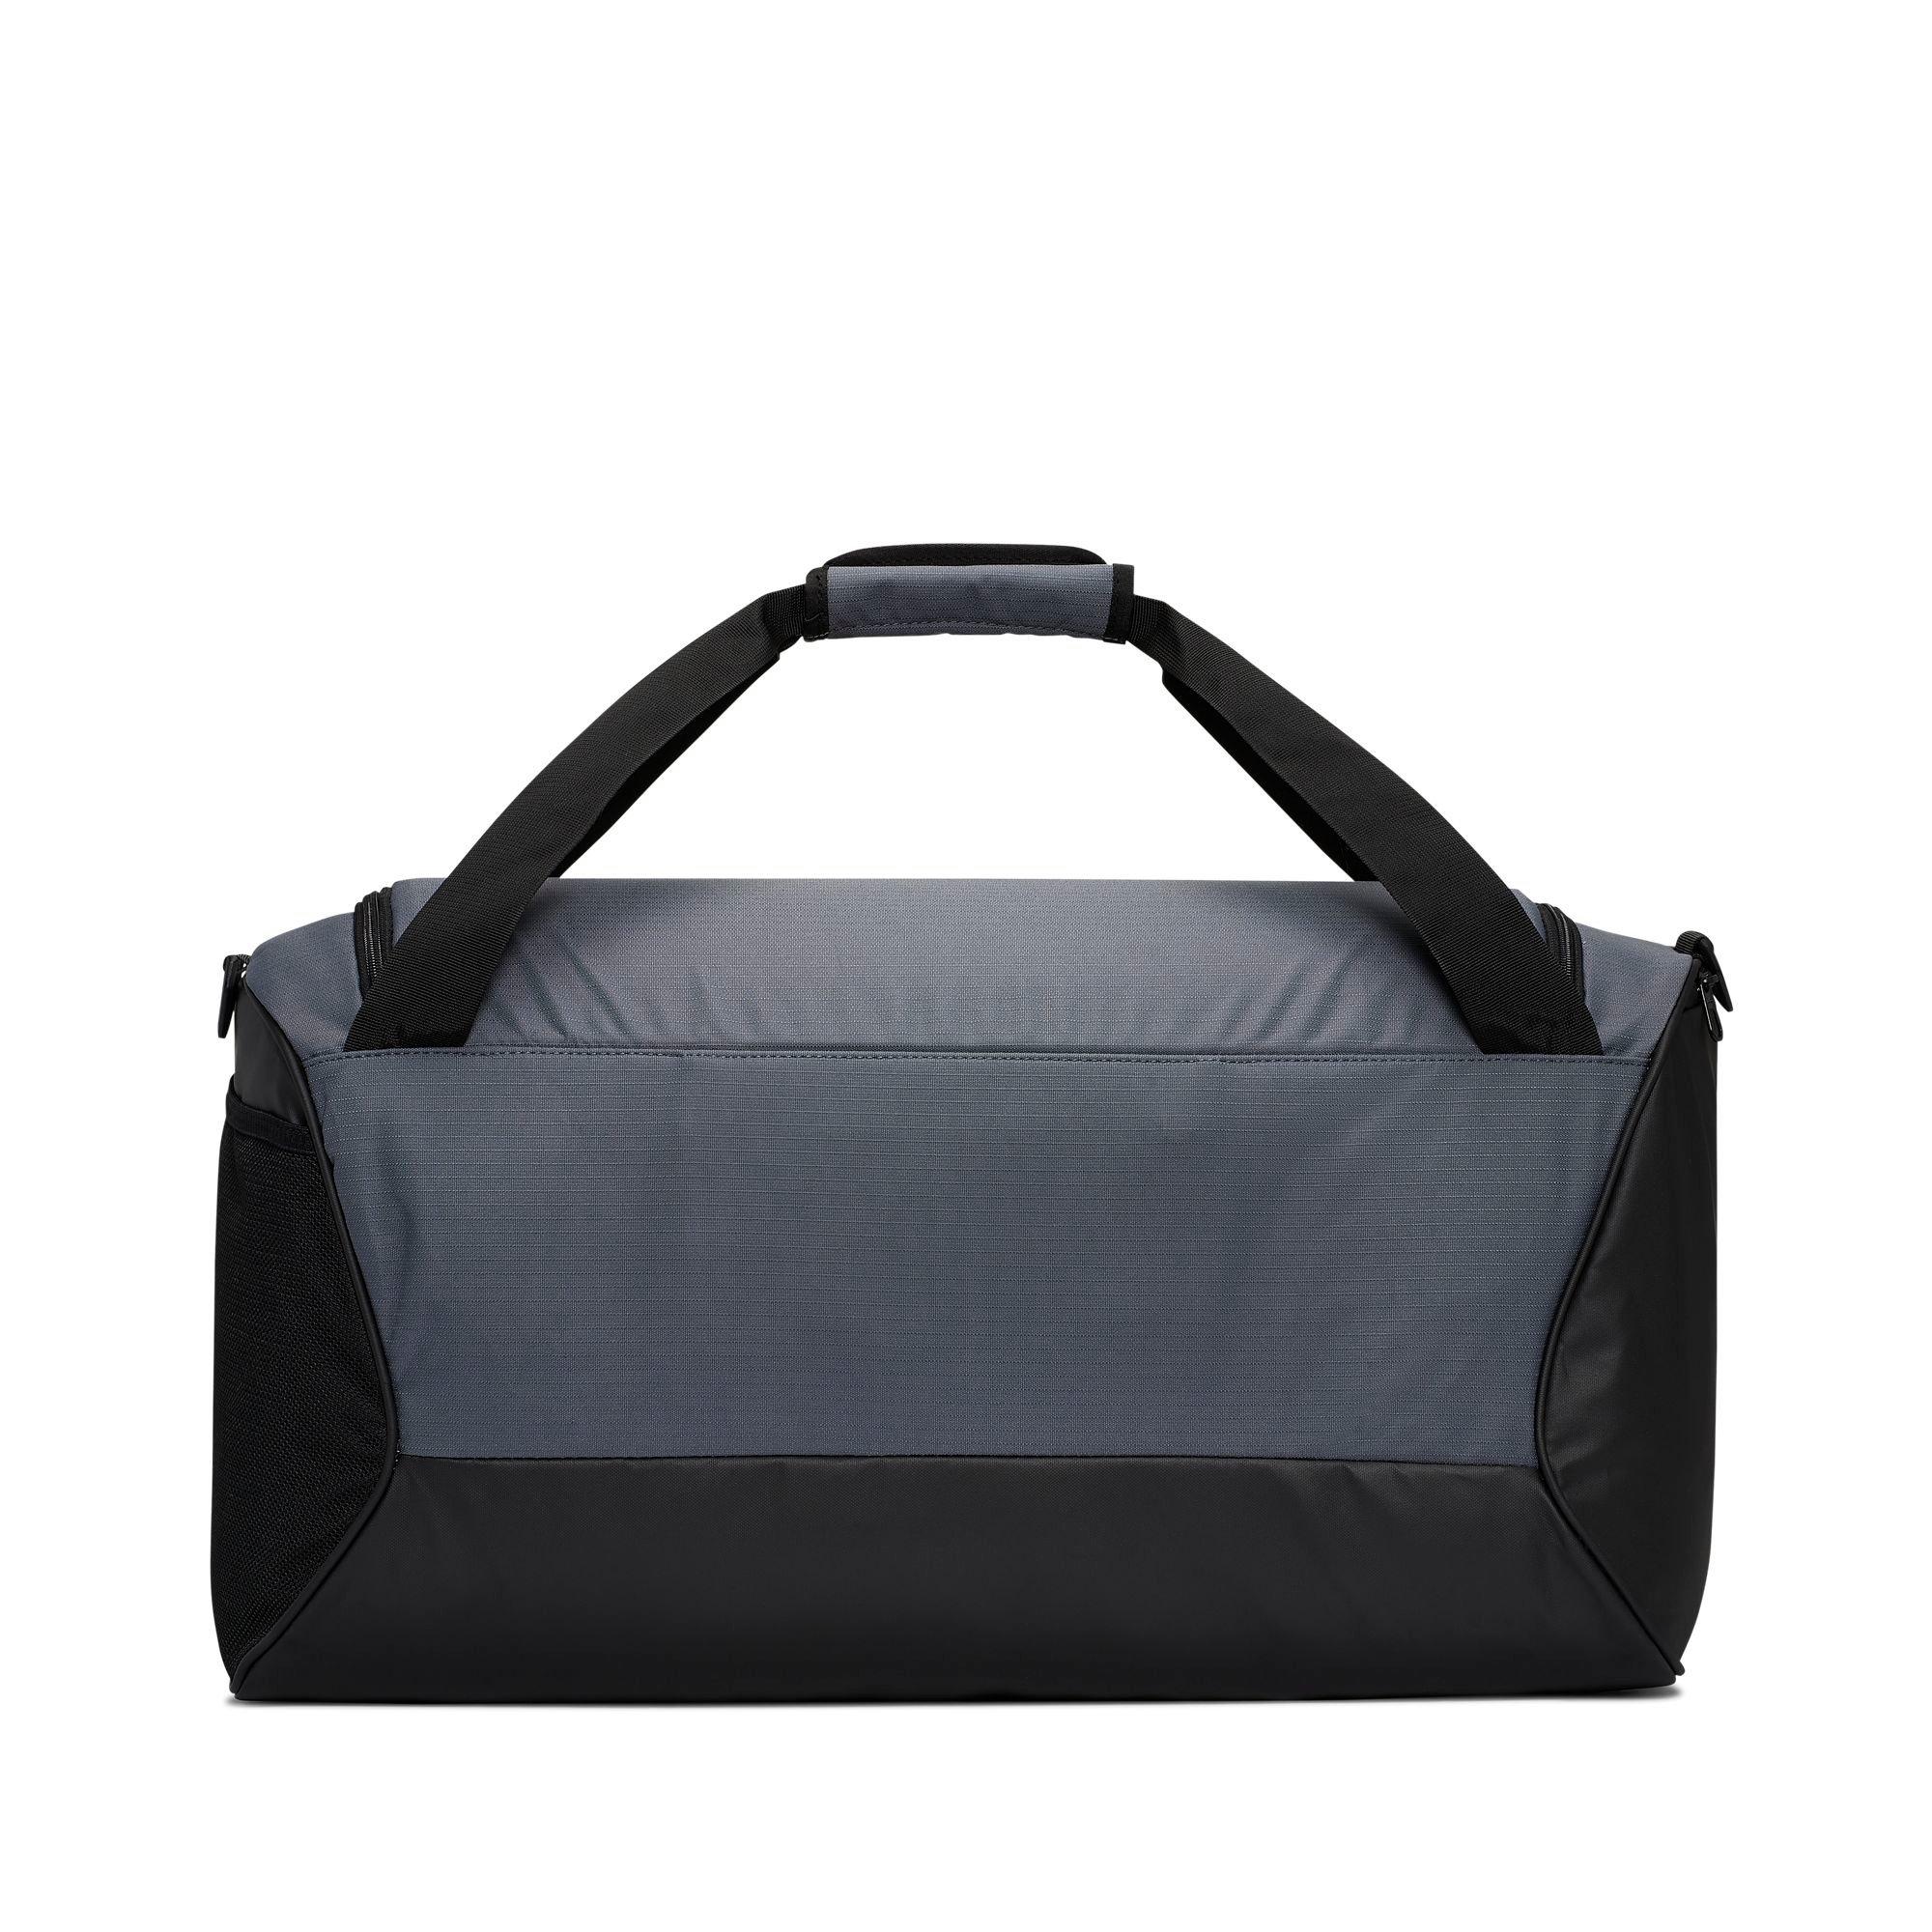 The durable Nike Brasilia Duffel features a spacious main compartment for  all your gear so you can feel prepared. Padded shoulder strap make it  carrying comfortable, and multiple exterior pockets provide quick-grab